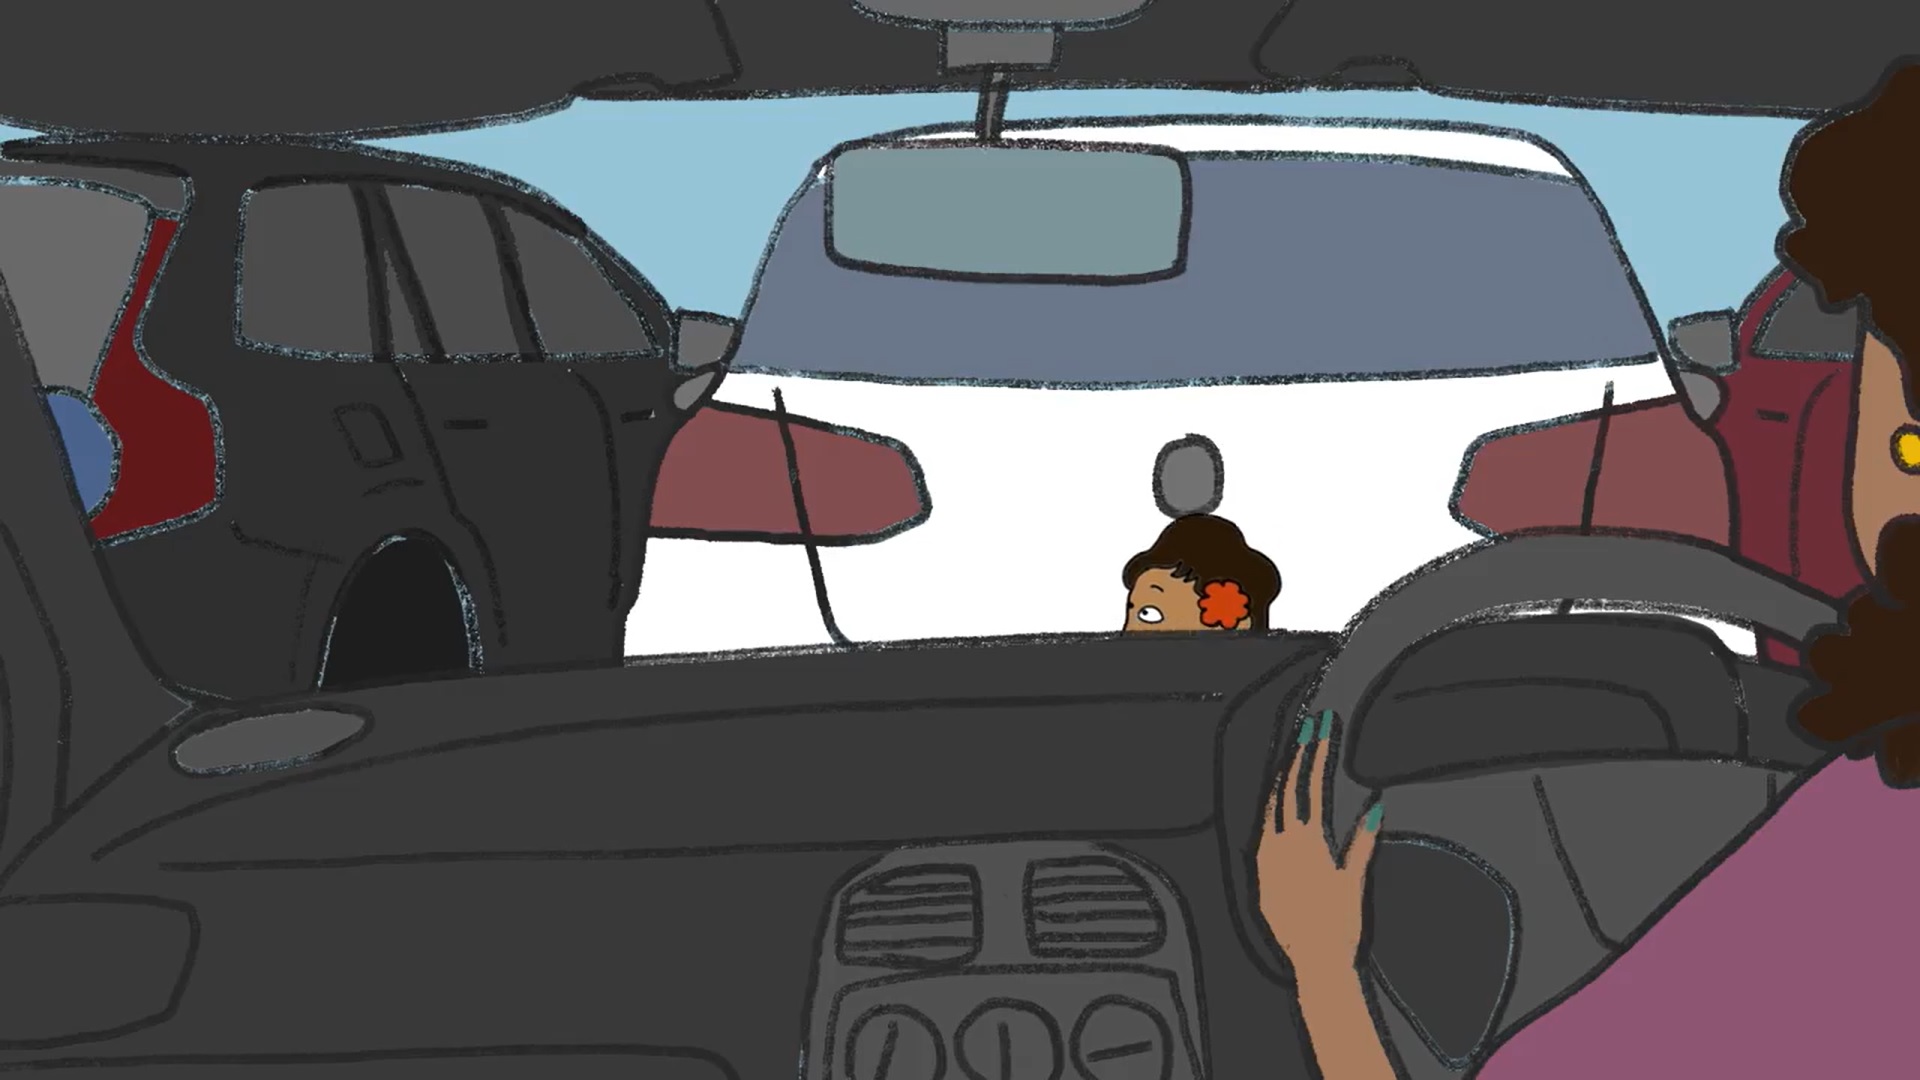 Rinku crosses the road but her short height decreases her visibility to the line of sight of drivers.